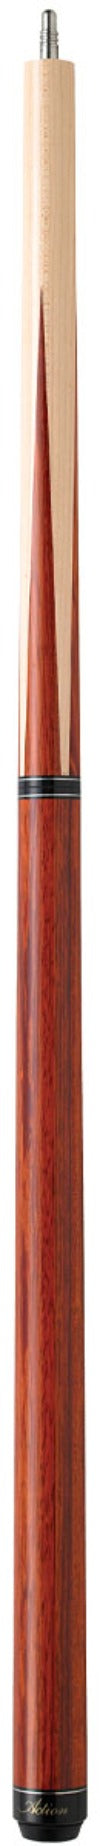 Action ACTBJR Pool Cue